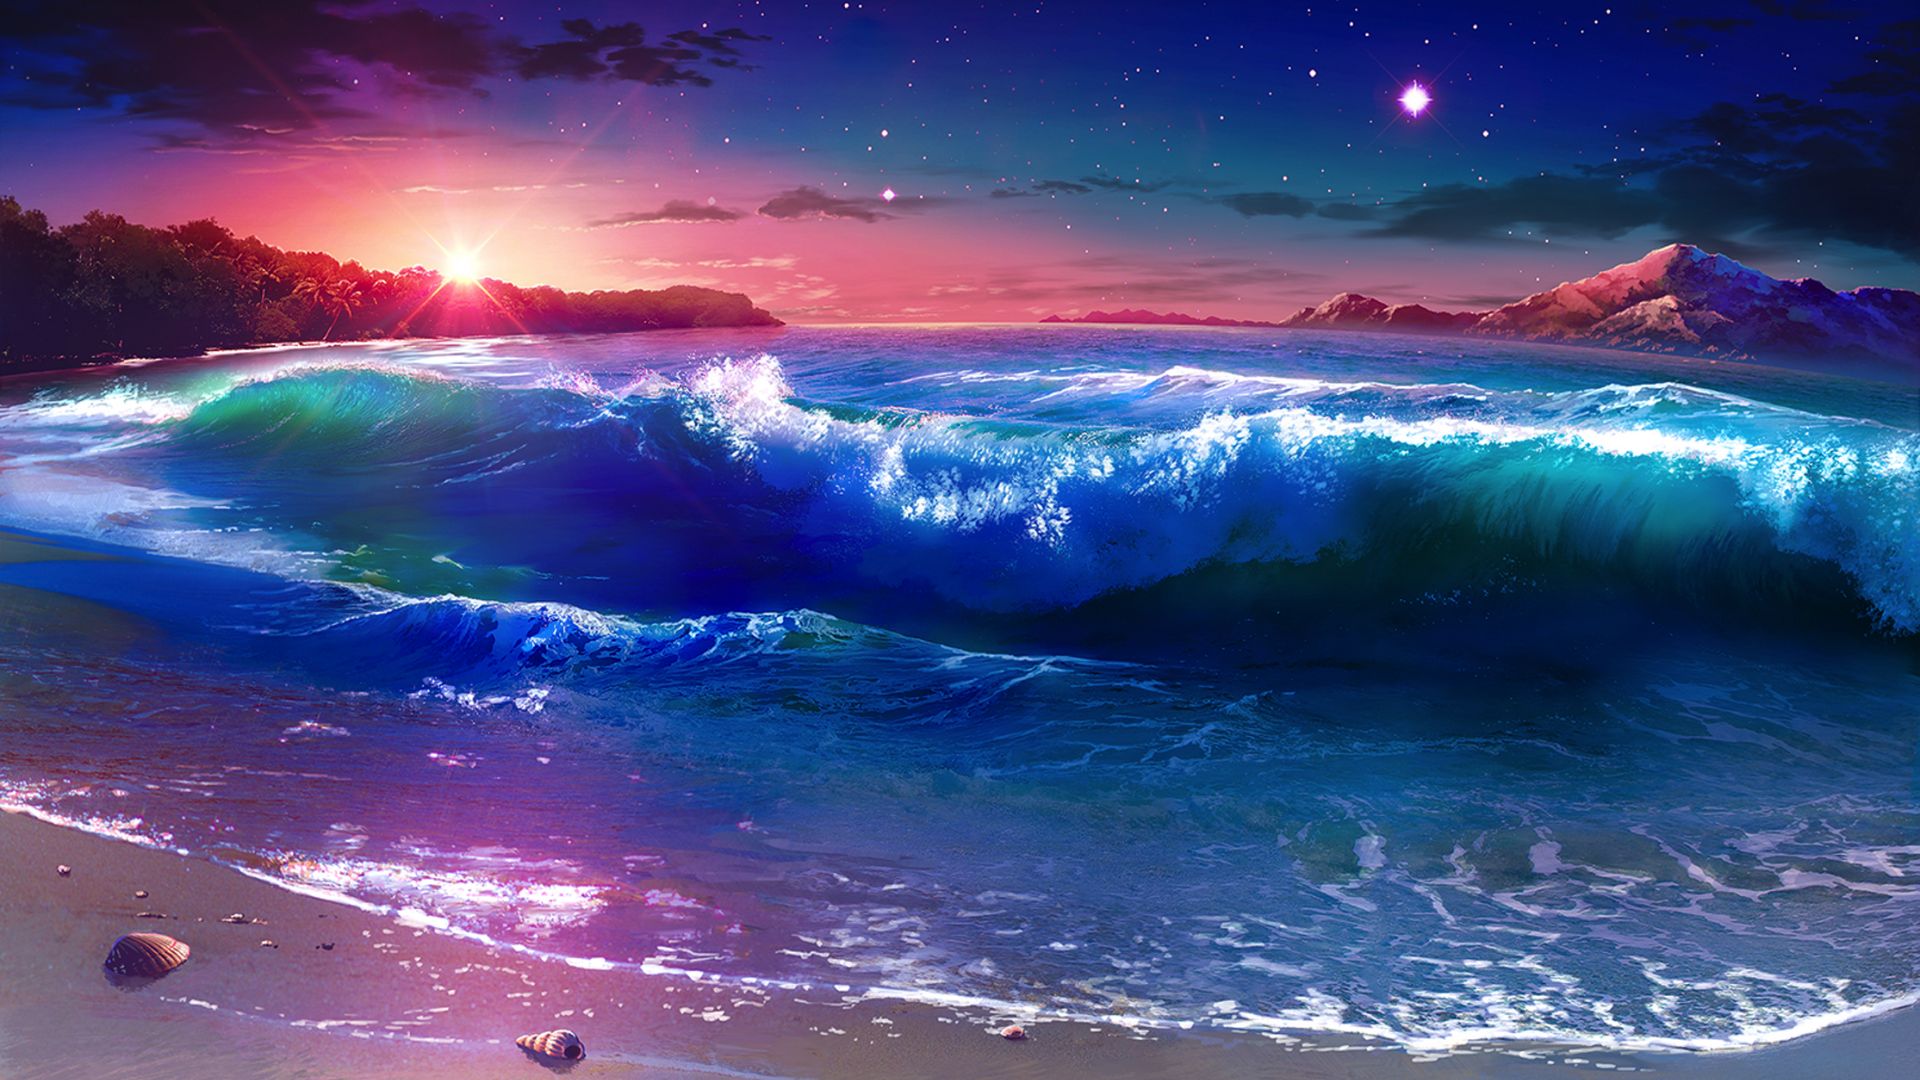 Ocean and clouds anime manga scenery 4K drawing of a cloudscape  landscape Colorful pink blue sea with cloud at dusk or dawn Perfect  wallpaper or background Cartoon like painting Stock Illustration 